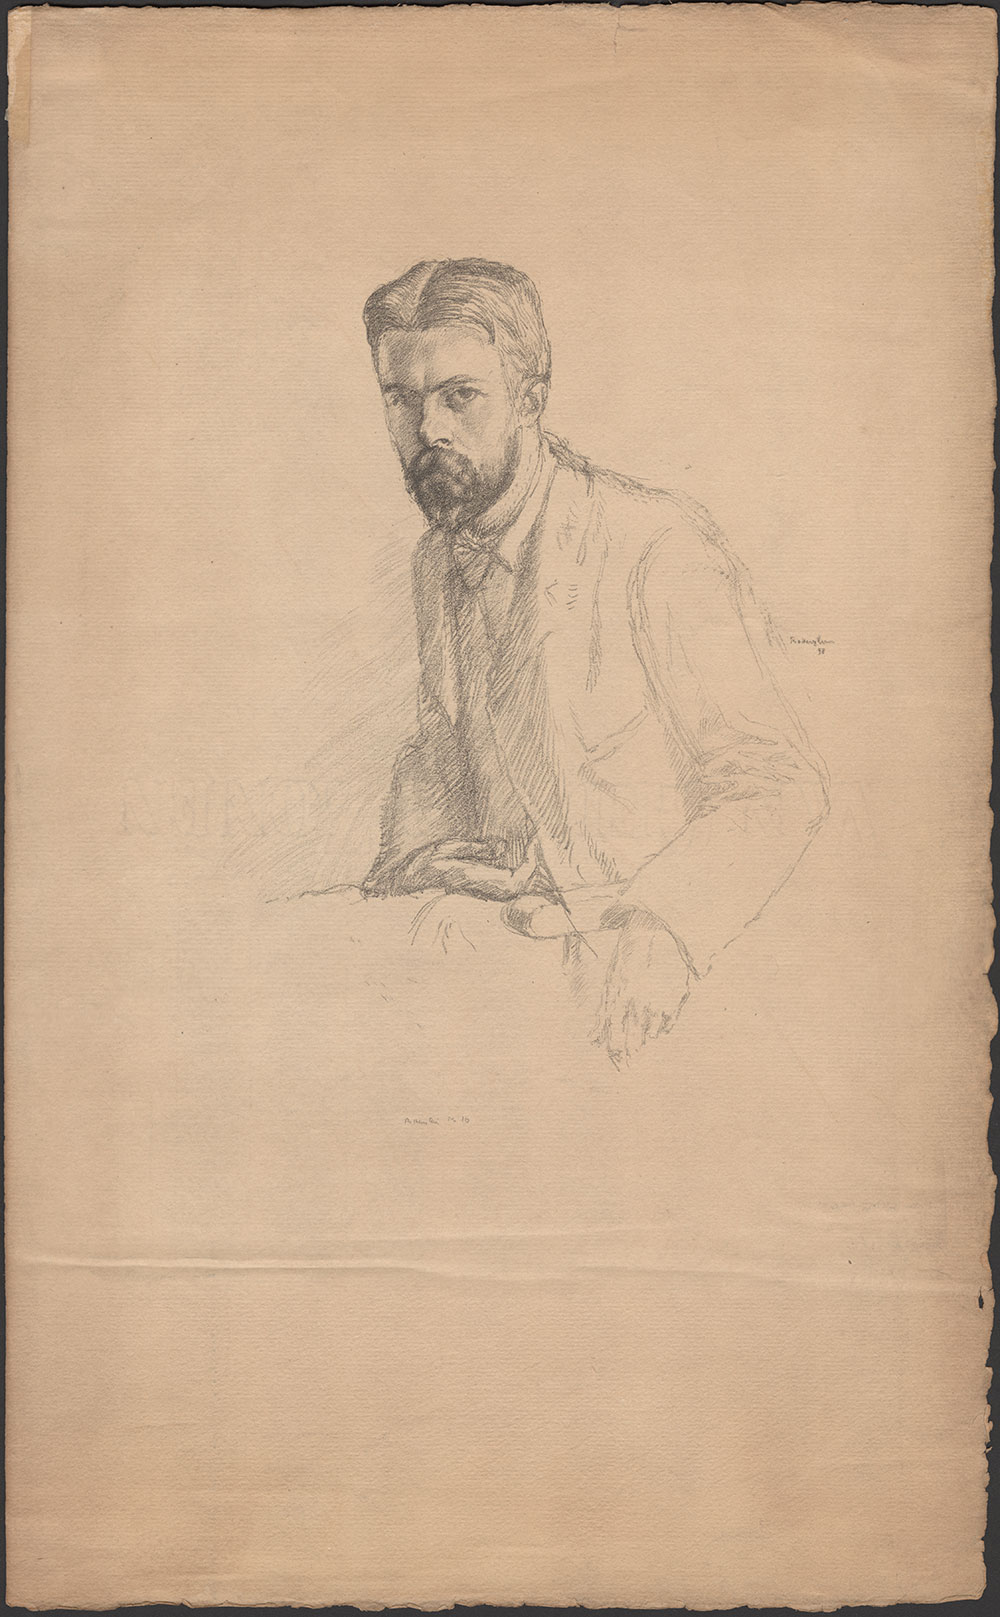 William Rothenstein. Proof lithograph portrait of Laurence Housman, 1898